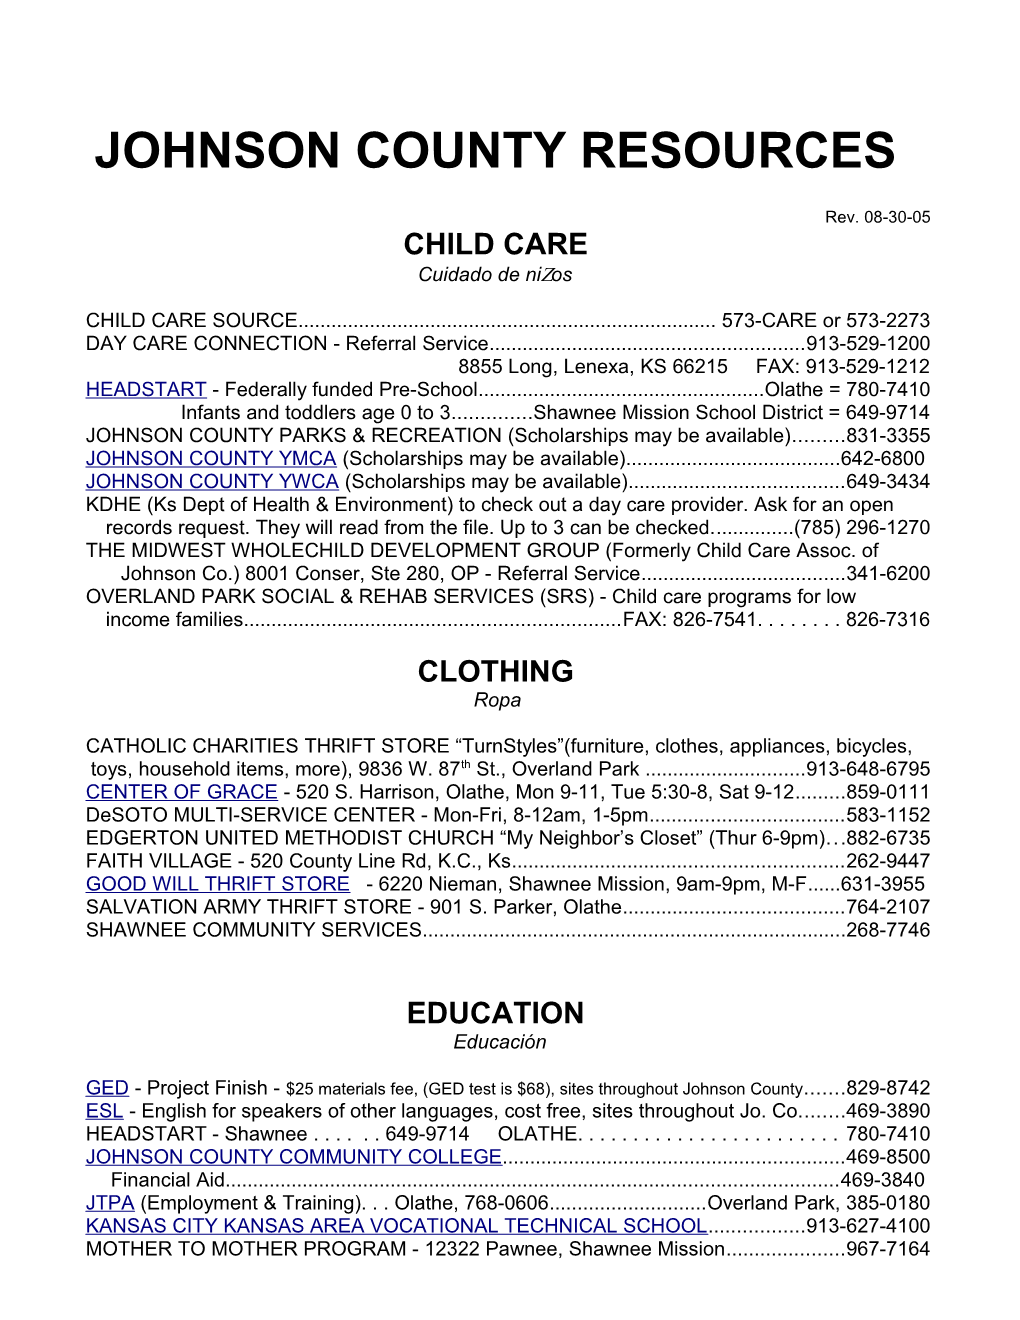 Johnson County Resources